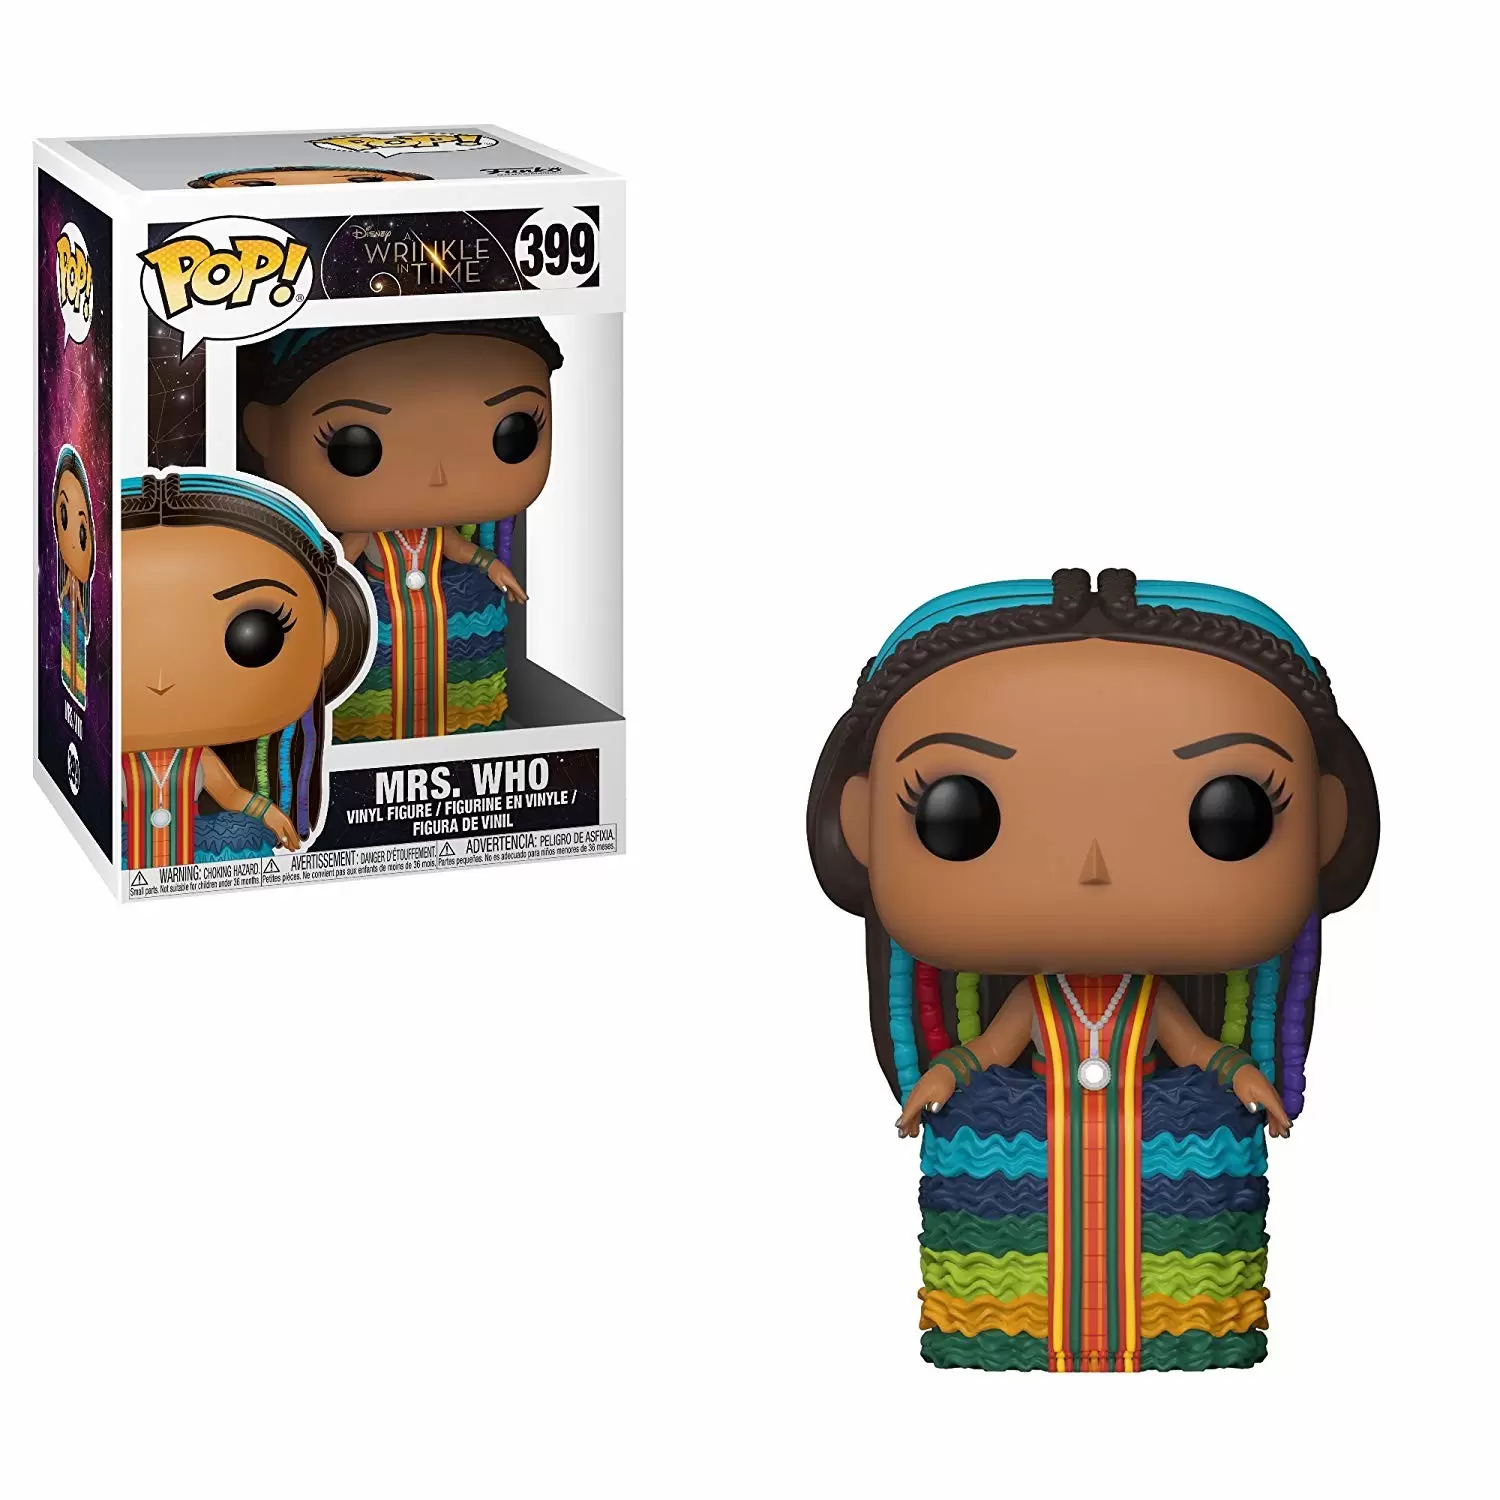 POP! Disney - A wrinkle in Time - Mrs. Who